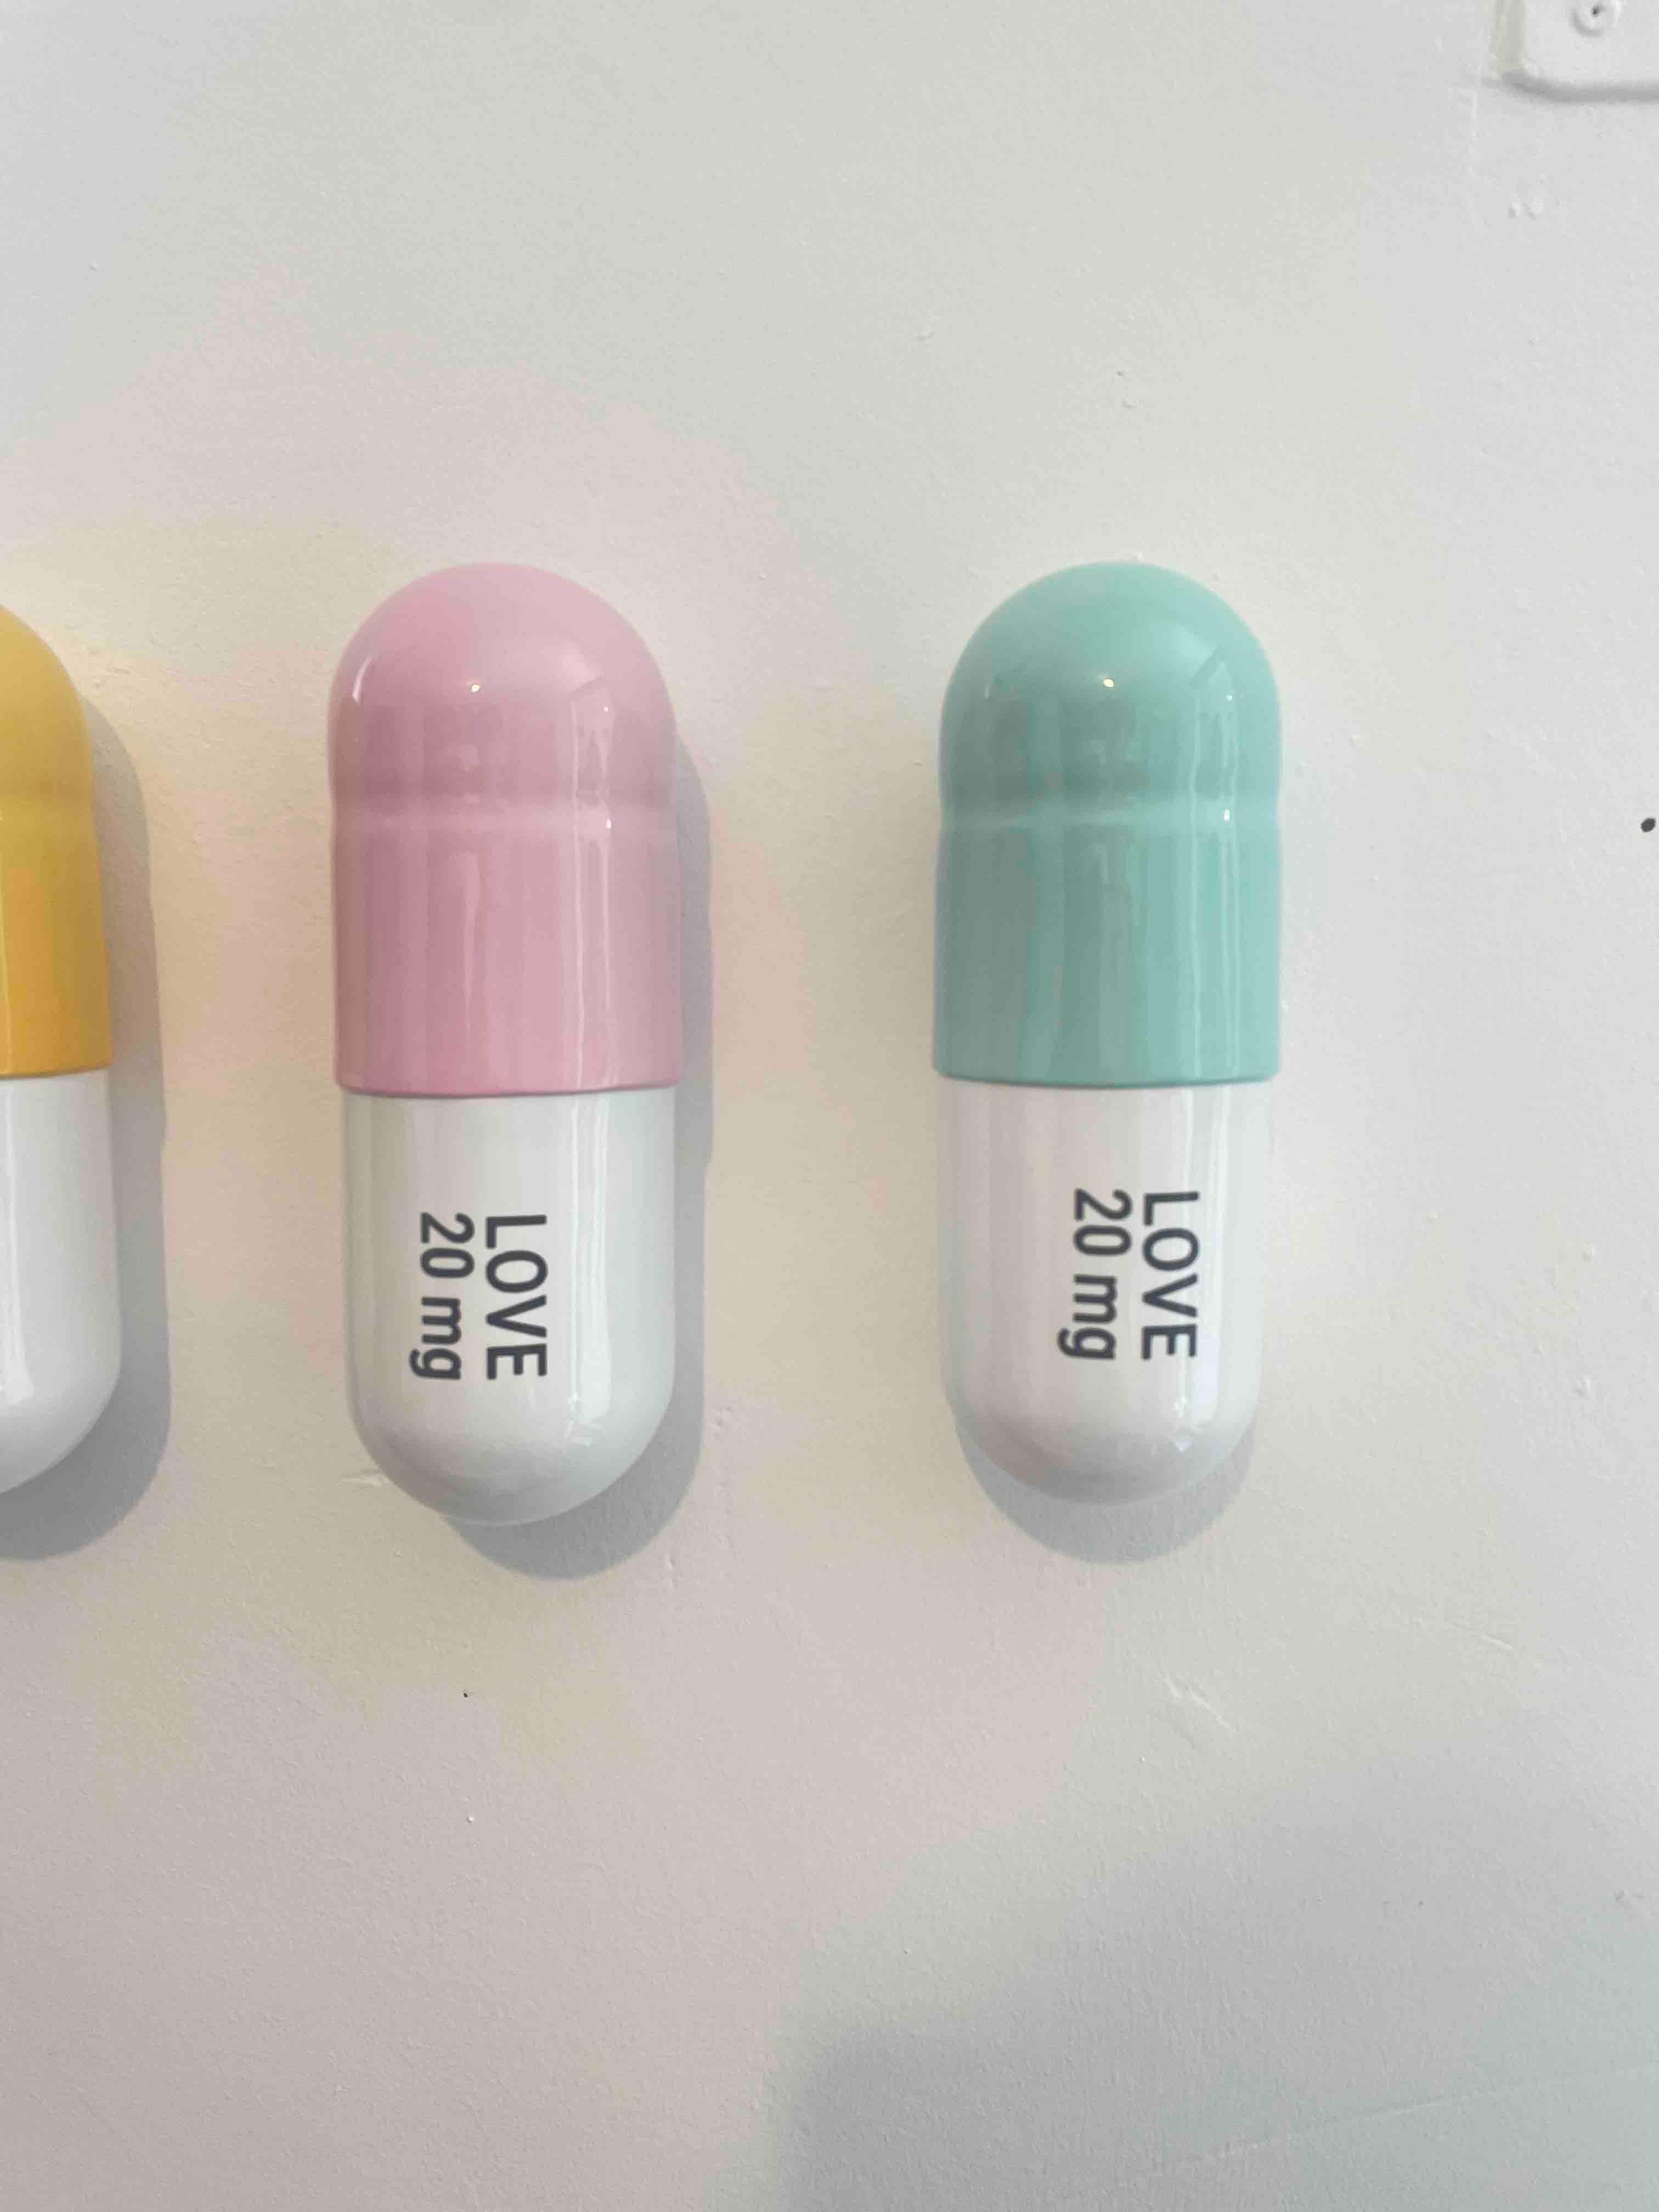 20 MG Love pill Combo (mint green, yellow and light pink) - figurative sculpture - Sculpture by Tal Nehoray